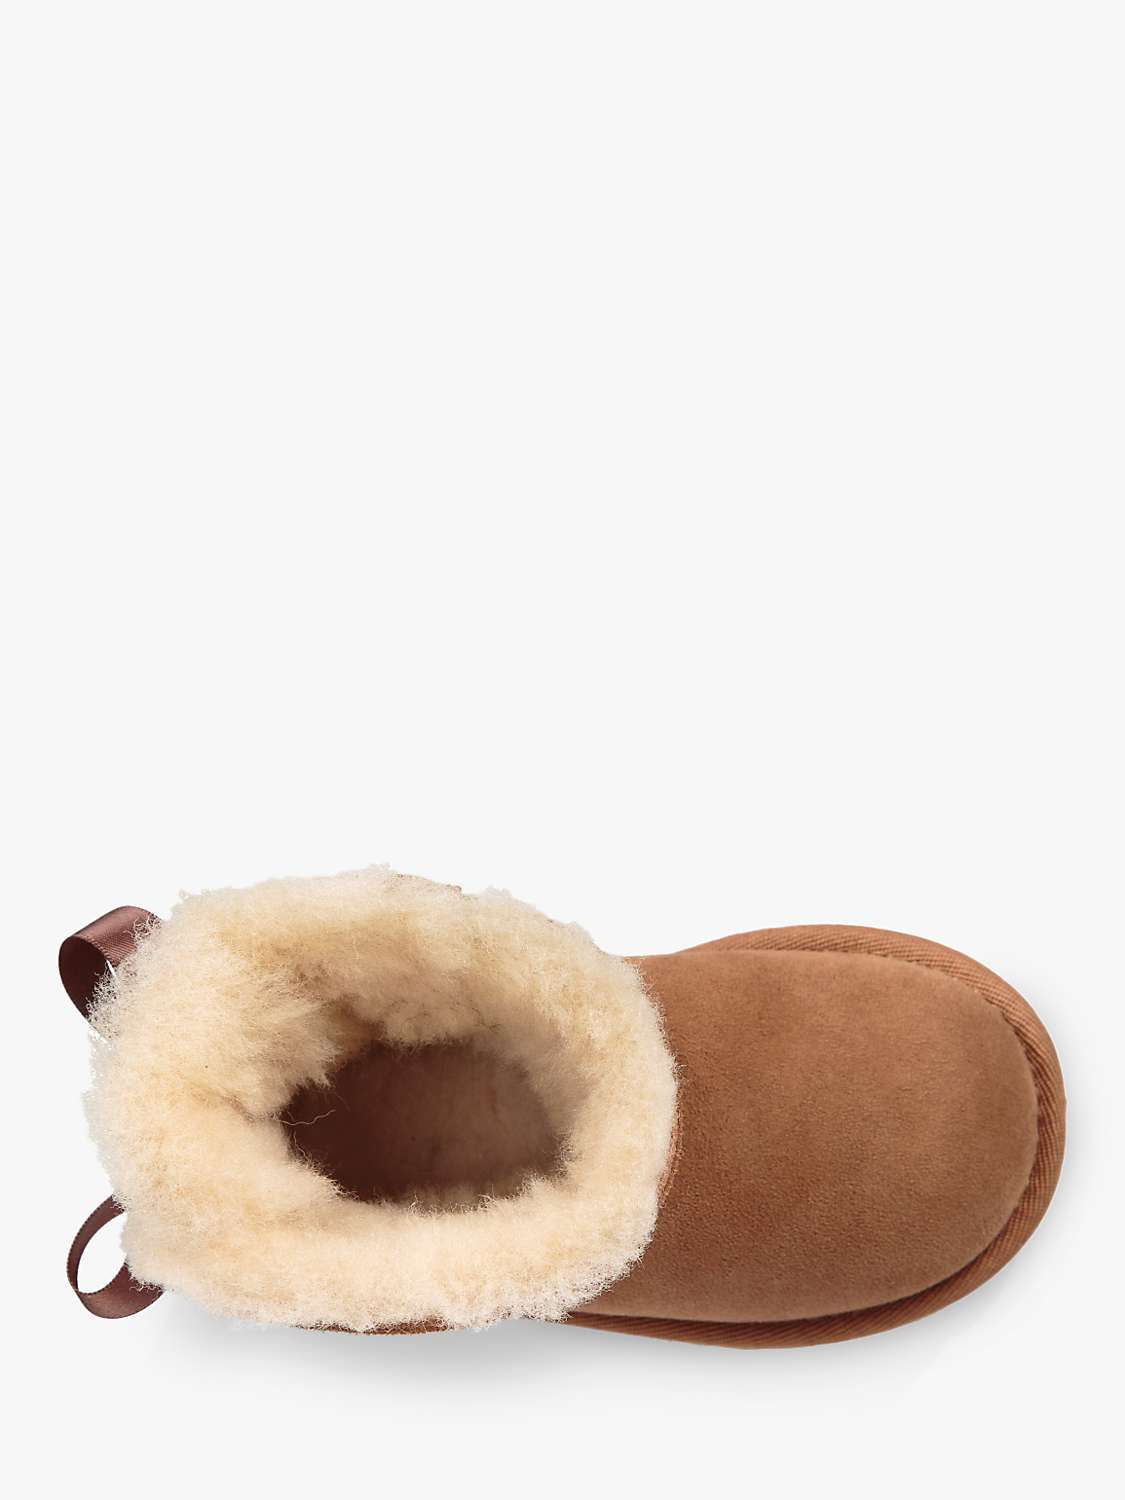 Buy UGG Kids' Mini Bailey Bow II Boots Online at johnlewis.com